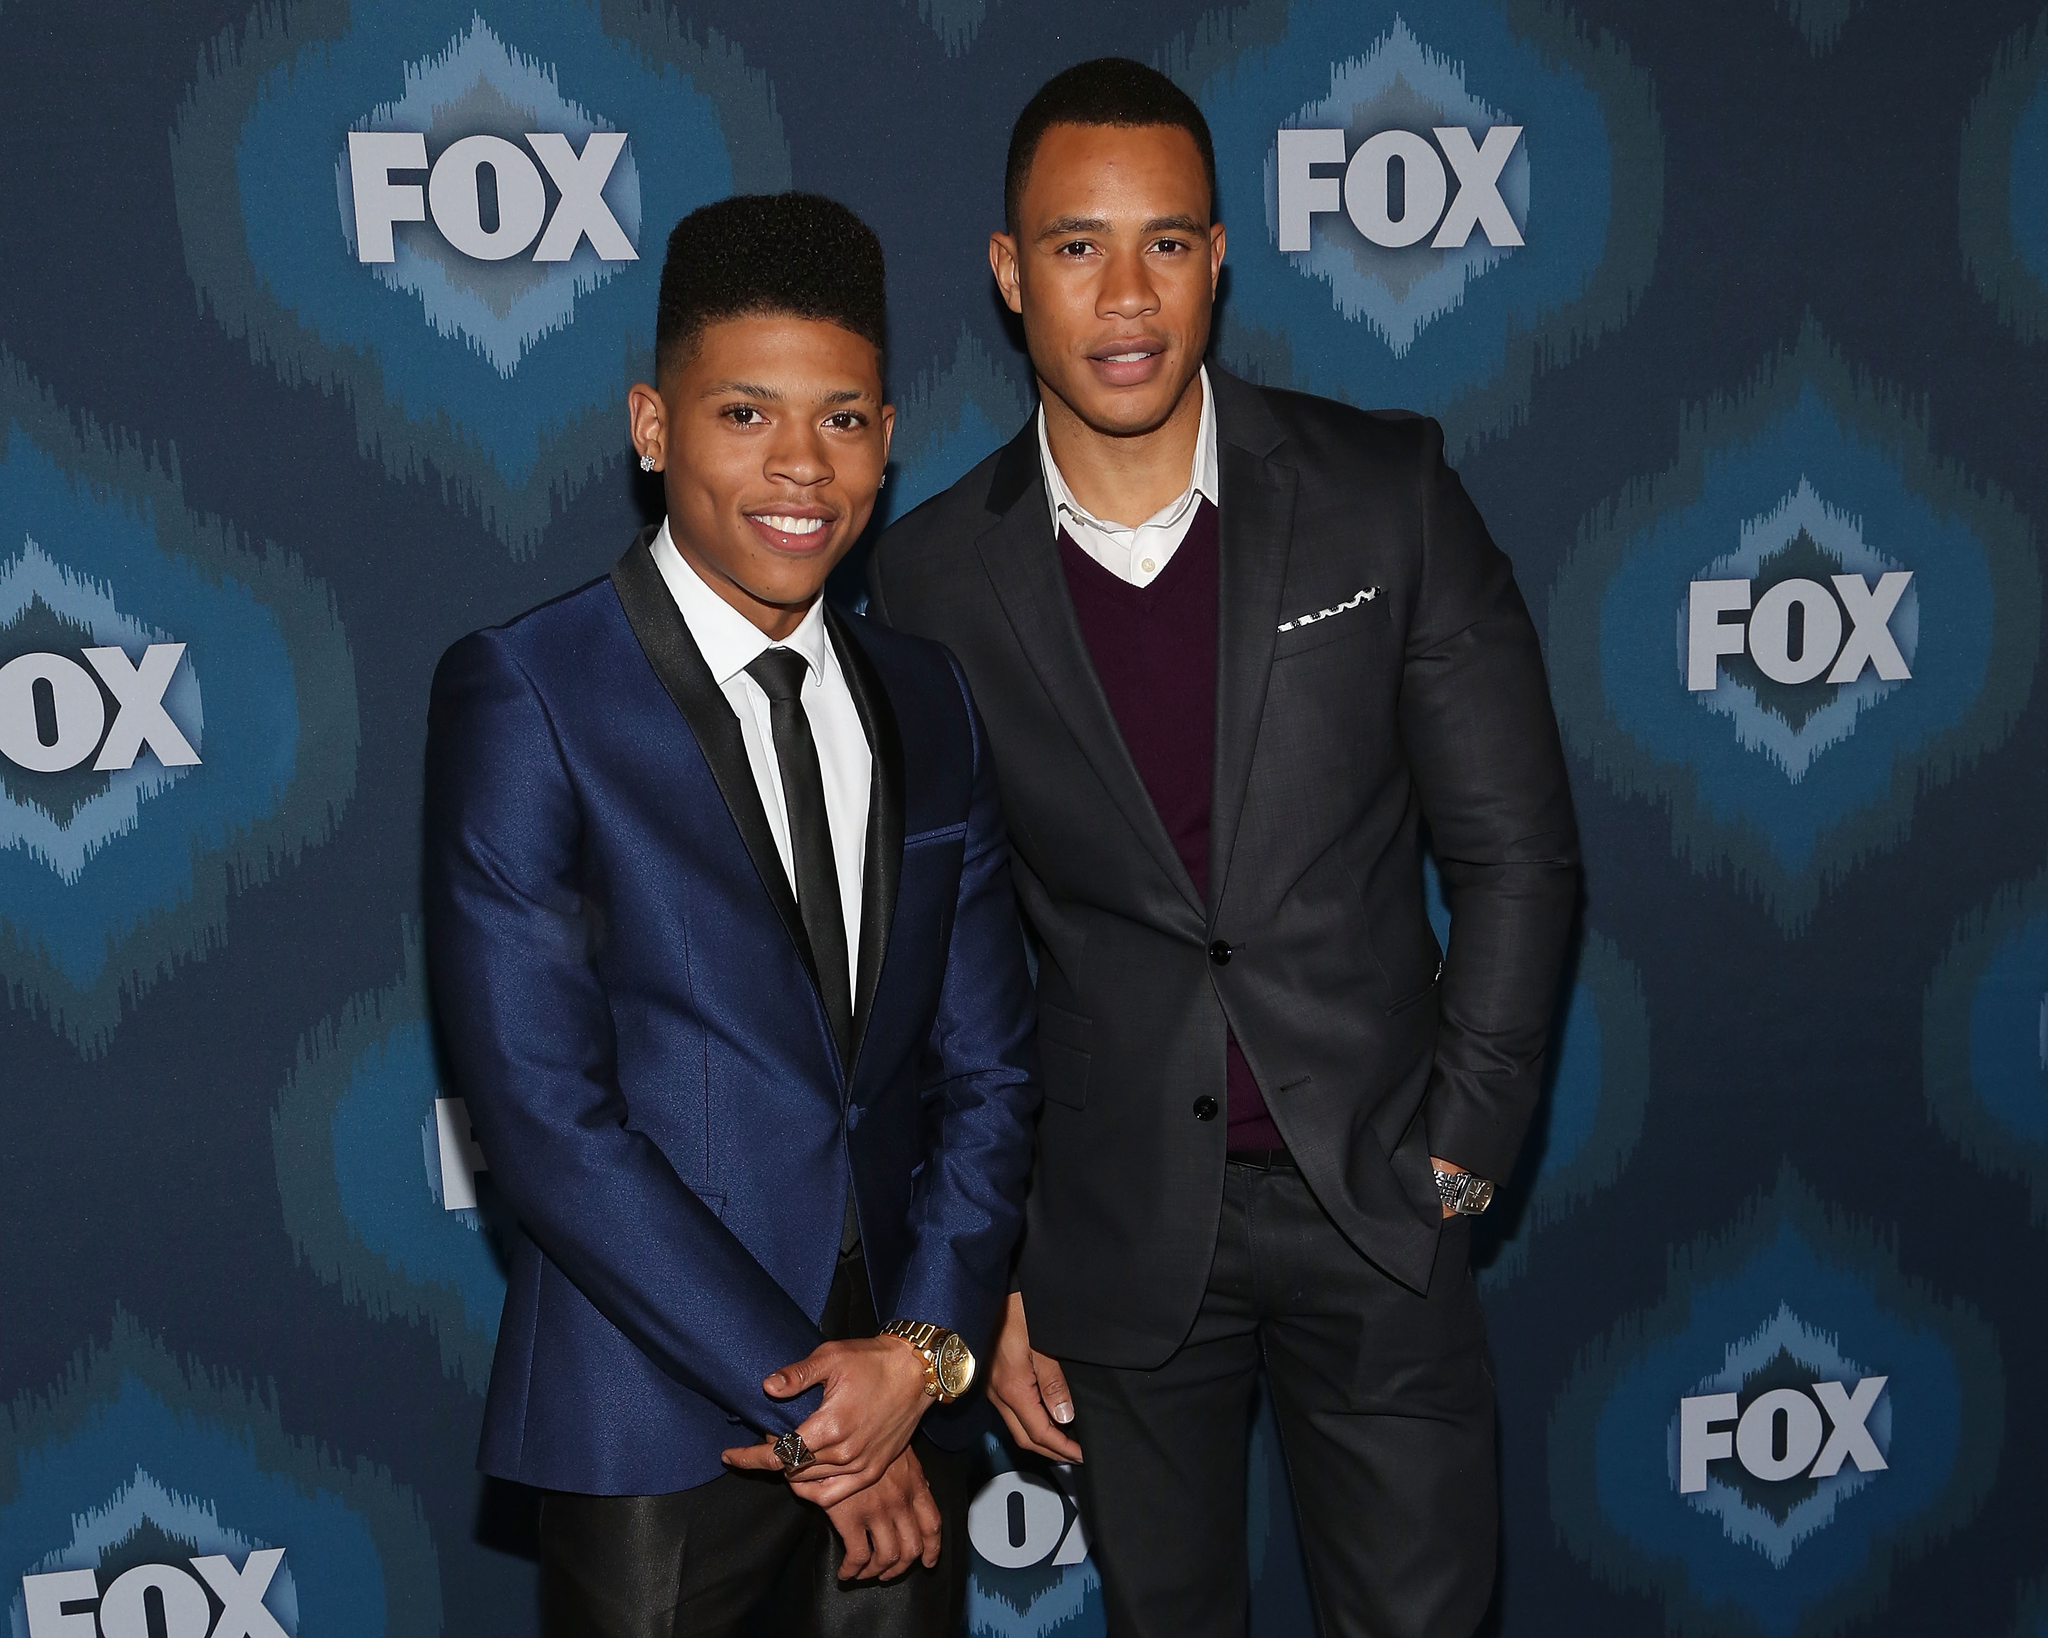 Trai Byers and Bryshere Y. Gray